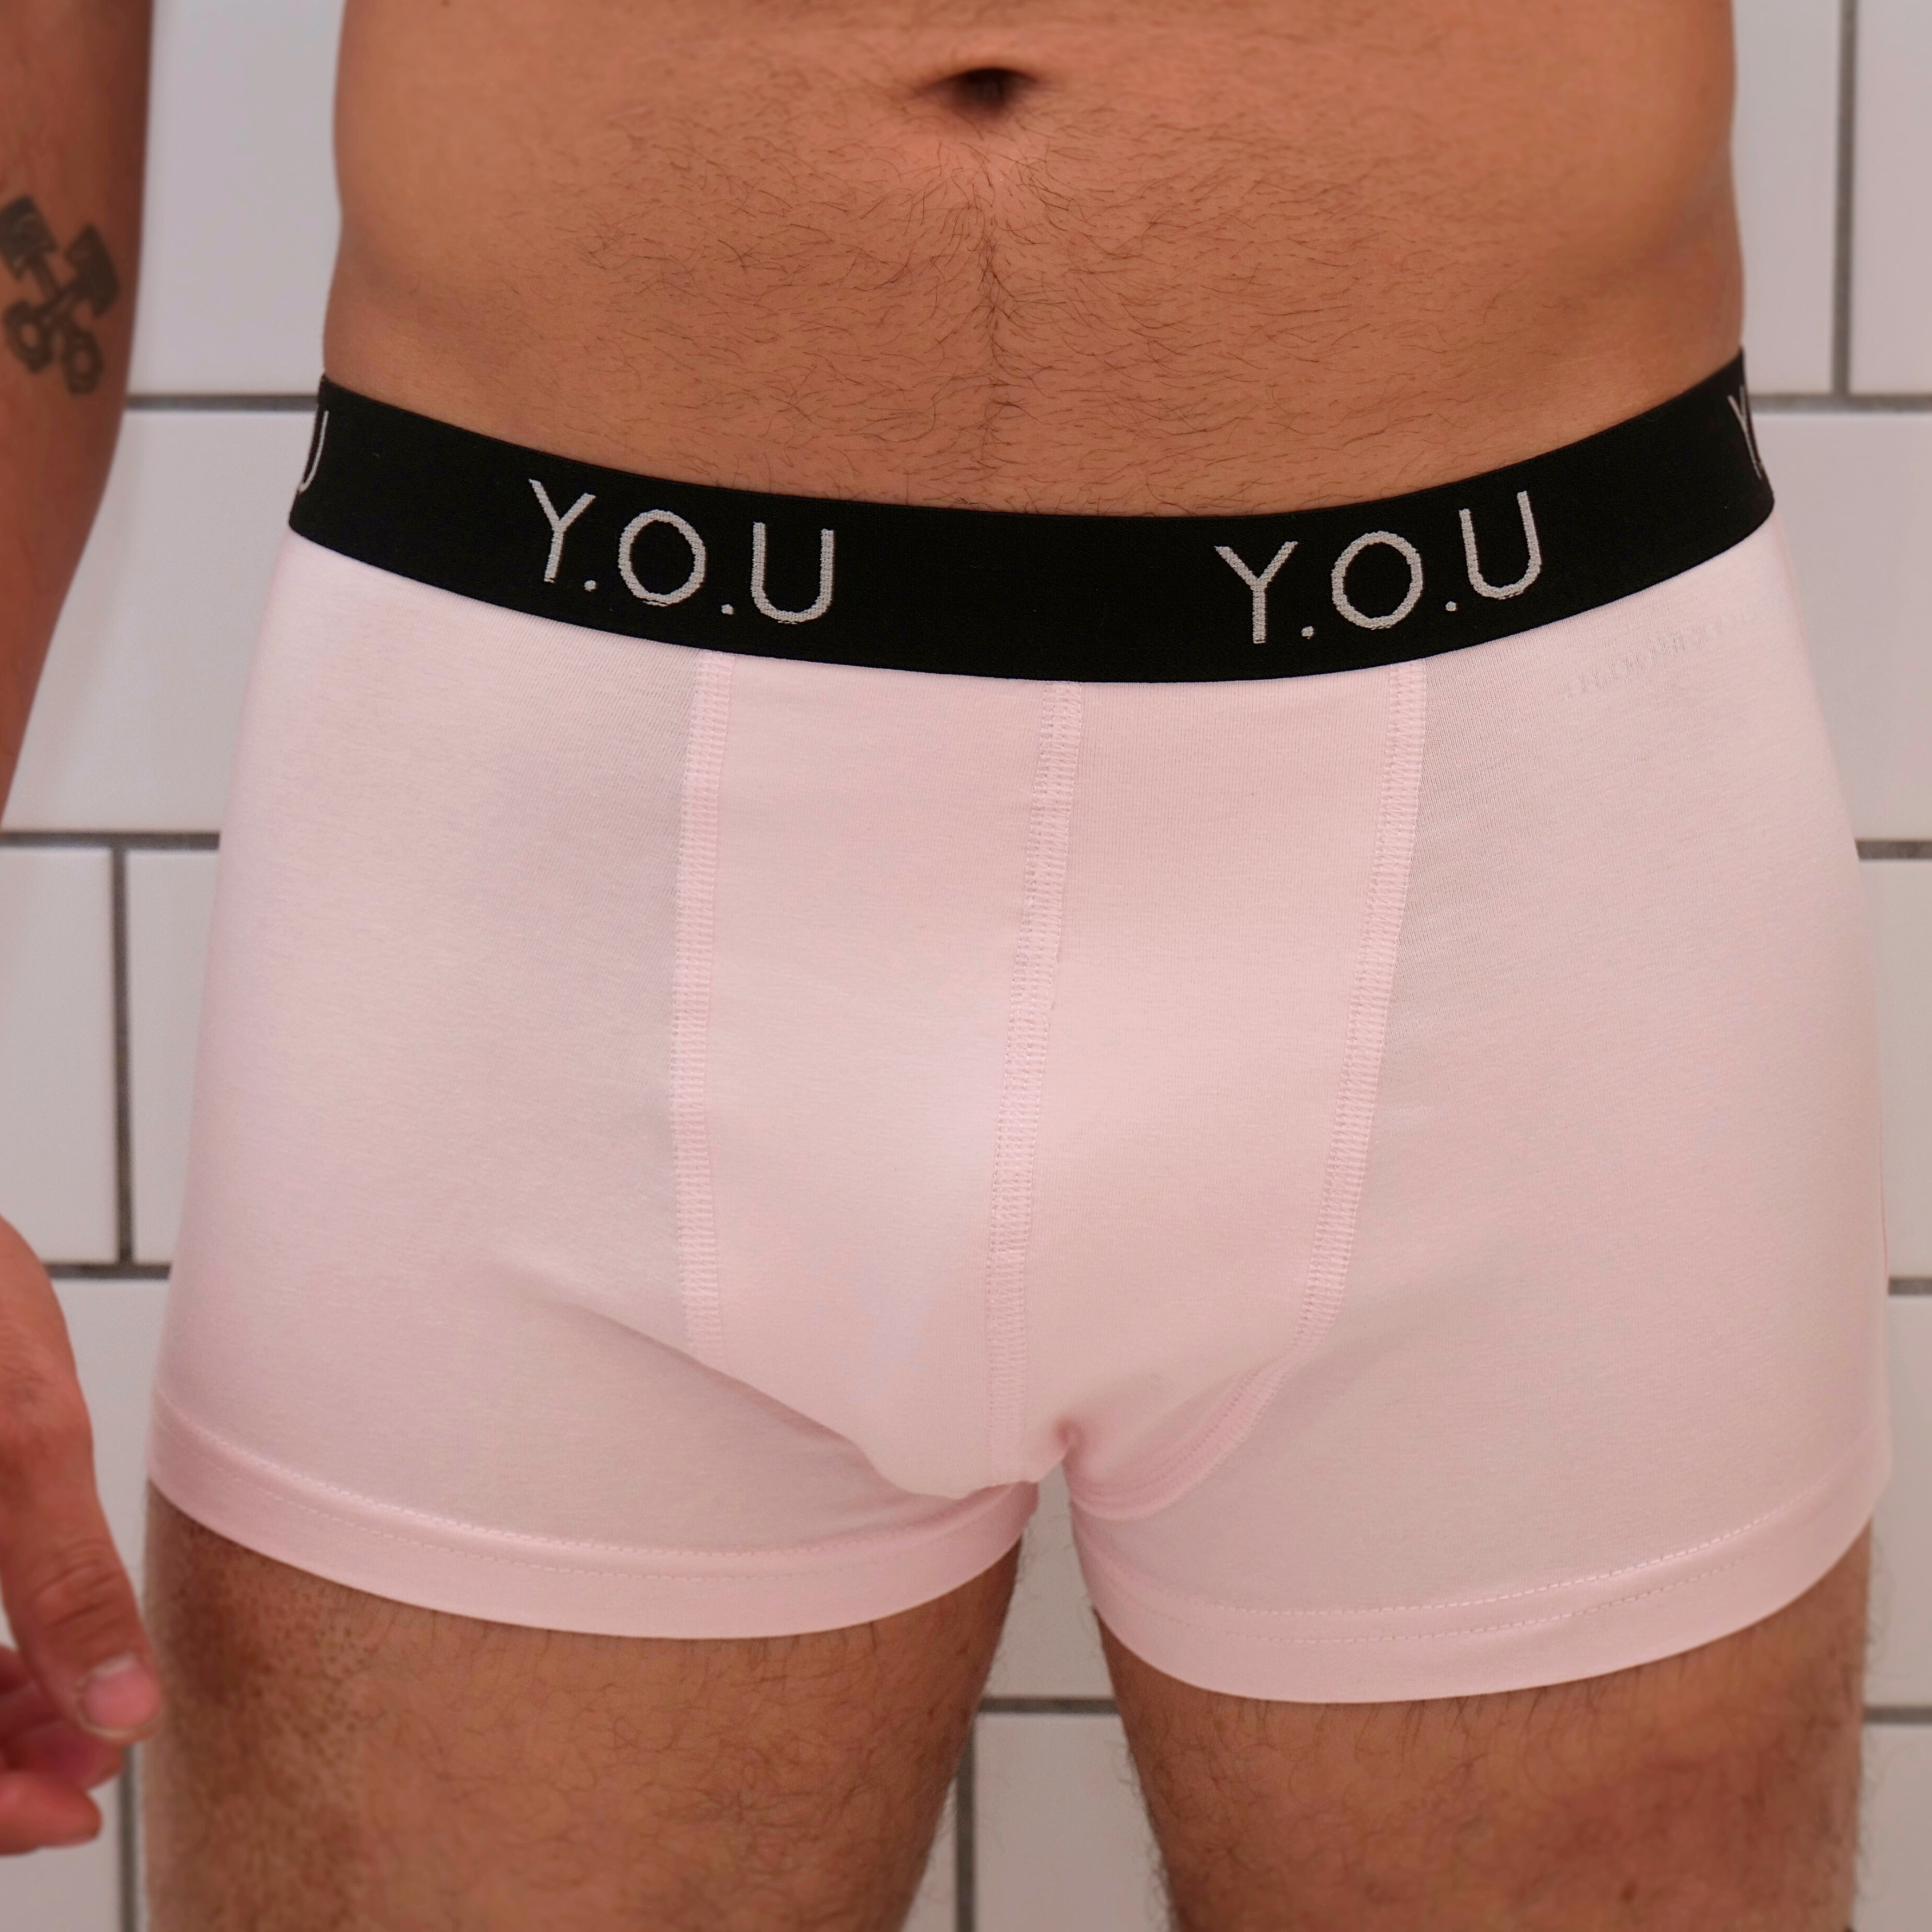 Close-up of a person’s lower torso wearing pale pink hipster trunks with a black waistband featuring the text “Y.O.U” in white. The background is a tiled wall. A partial tattoo is visible on the person's right arm.